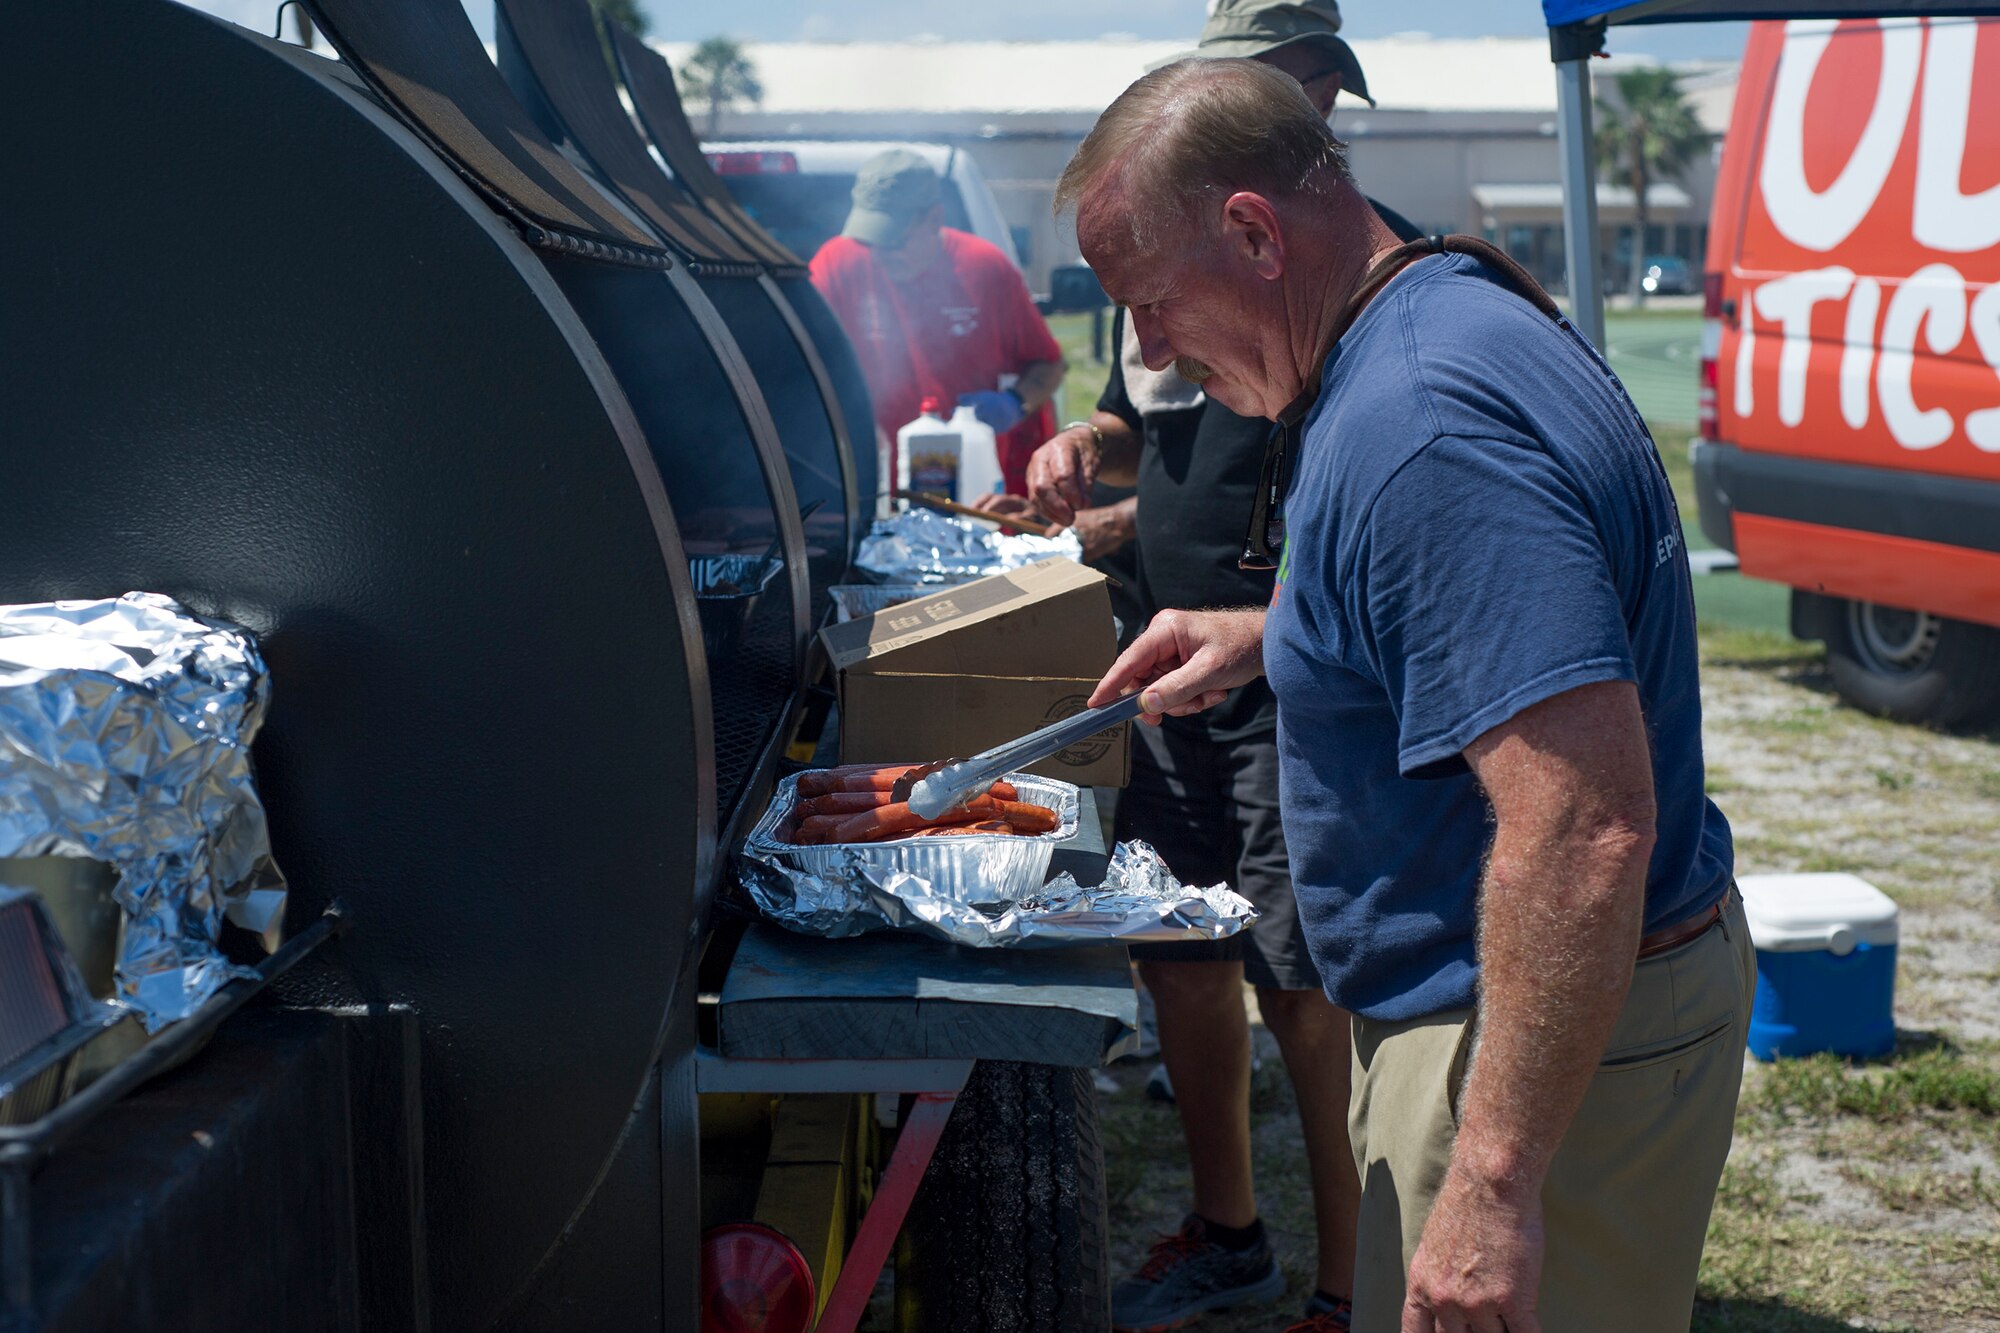 The 920th Rescue Wing held a biannual family day, at Patrick Air Force Base, Florida, Saturday, May 4, complete with food, games and live music. The local VFW outfit served up charcoal favorites during the festivities. (U.S. Air Force photo)